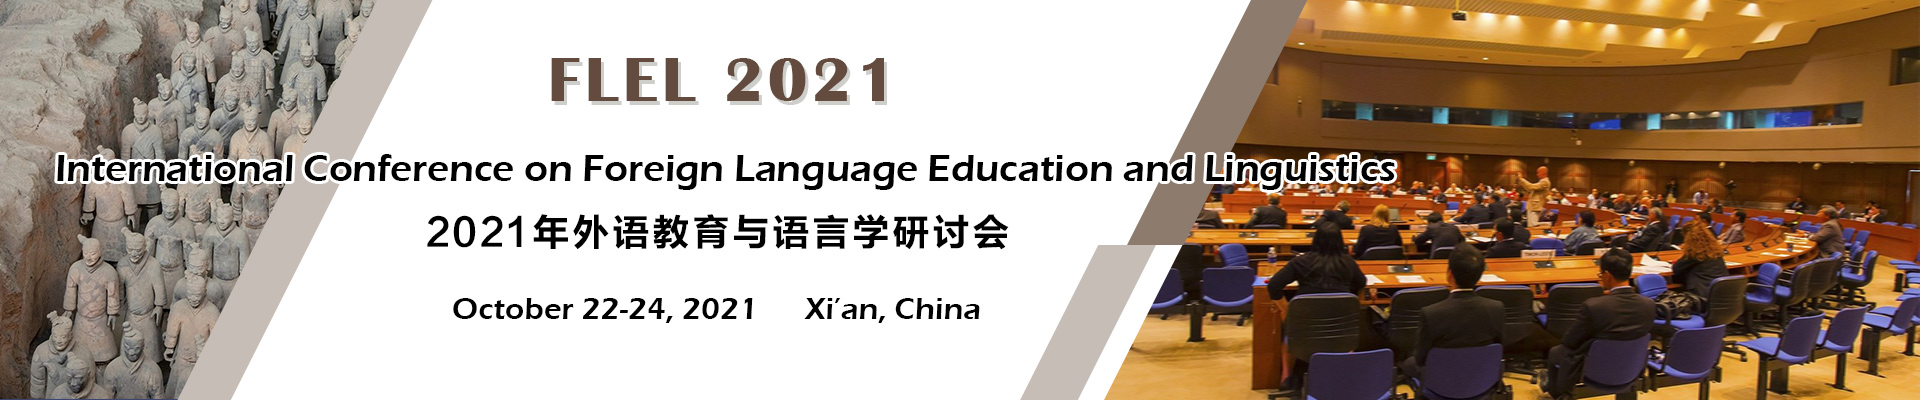 International Conference on Foreign Language Education and Linguistics (FLEL 2021), Xi'an, Shaanxi, China